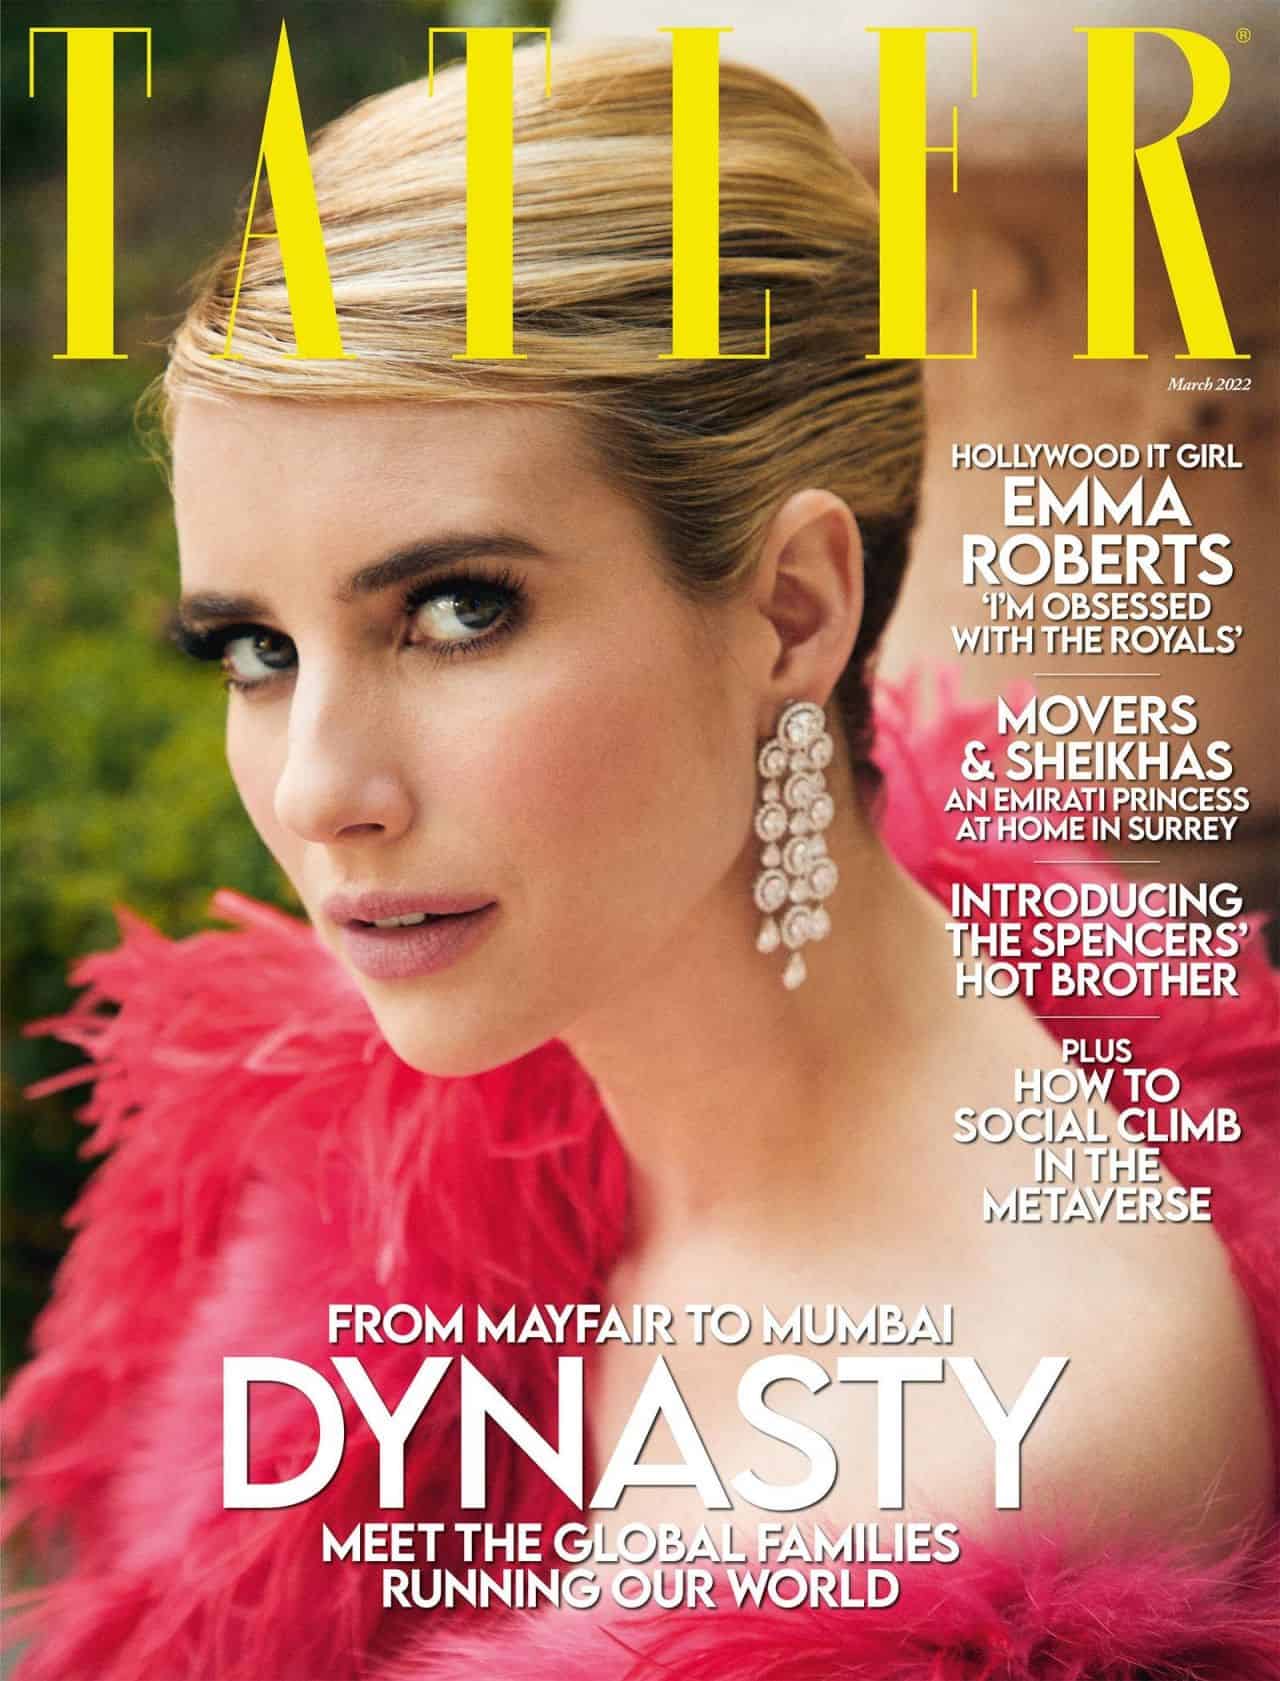 Emma Roberts Discusses New Beginnings in the Tatler March 2022 Cover Story